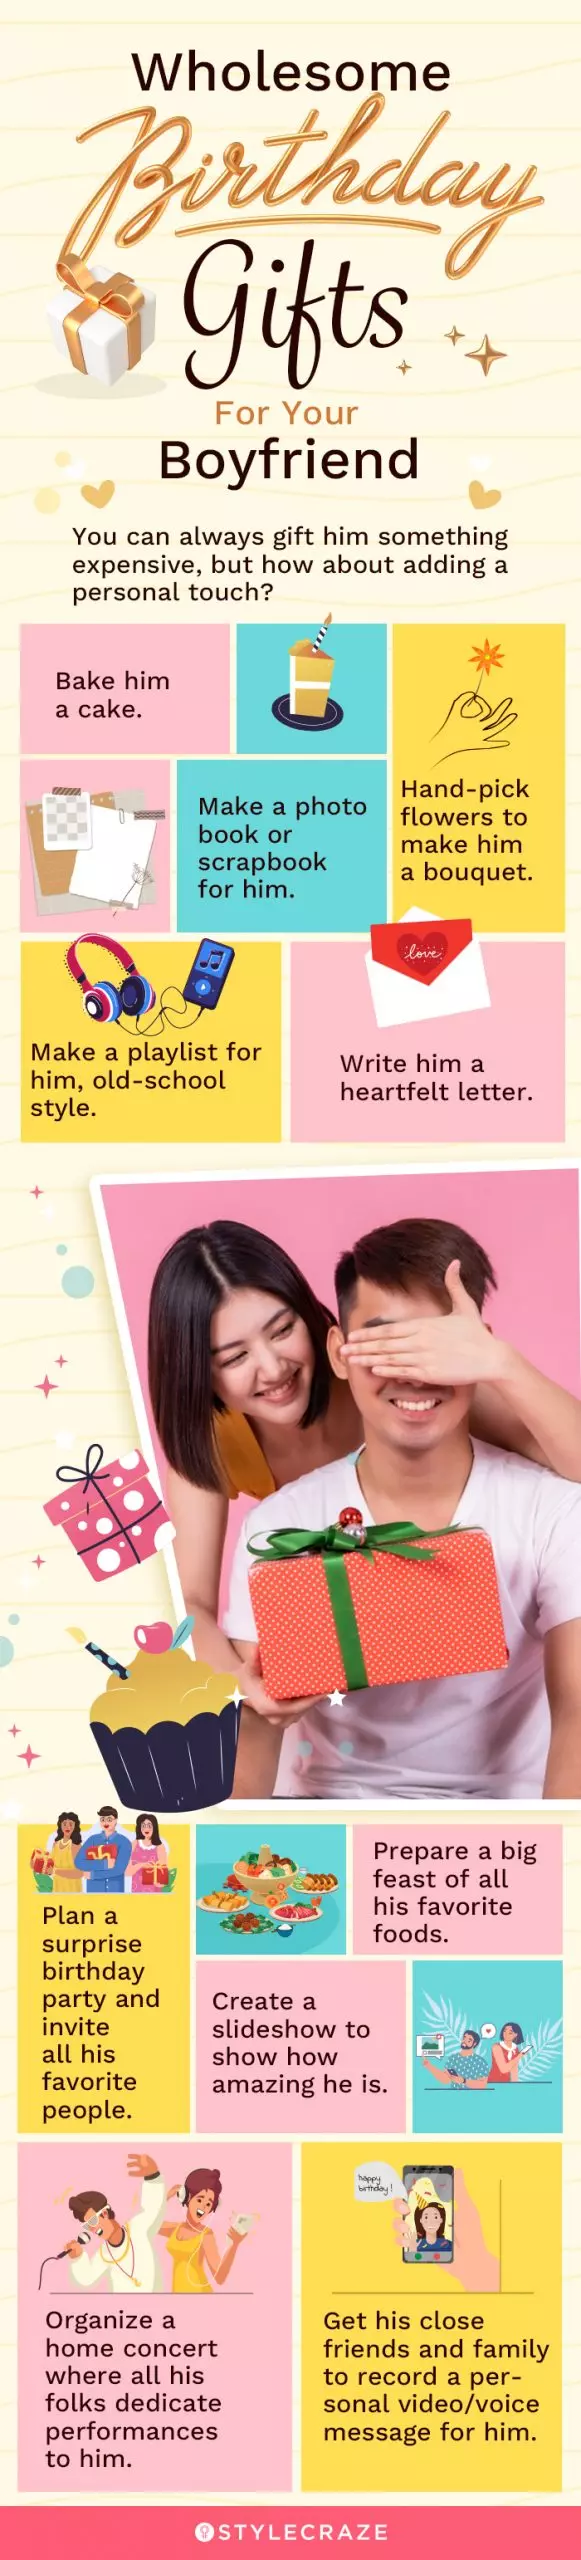 wholesome birthday gifts for your boyfriend (infographic)